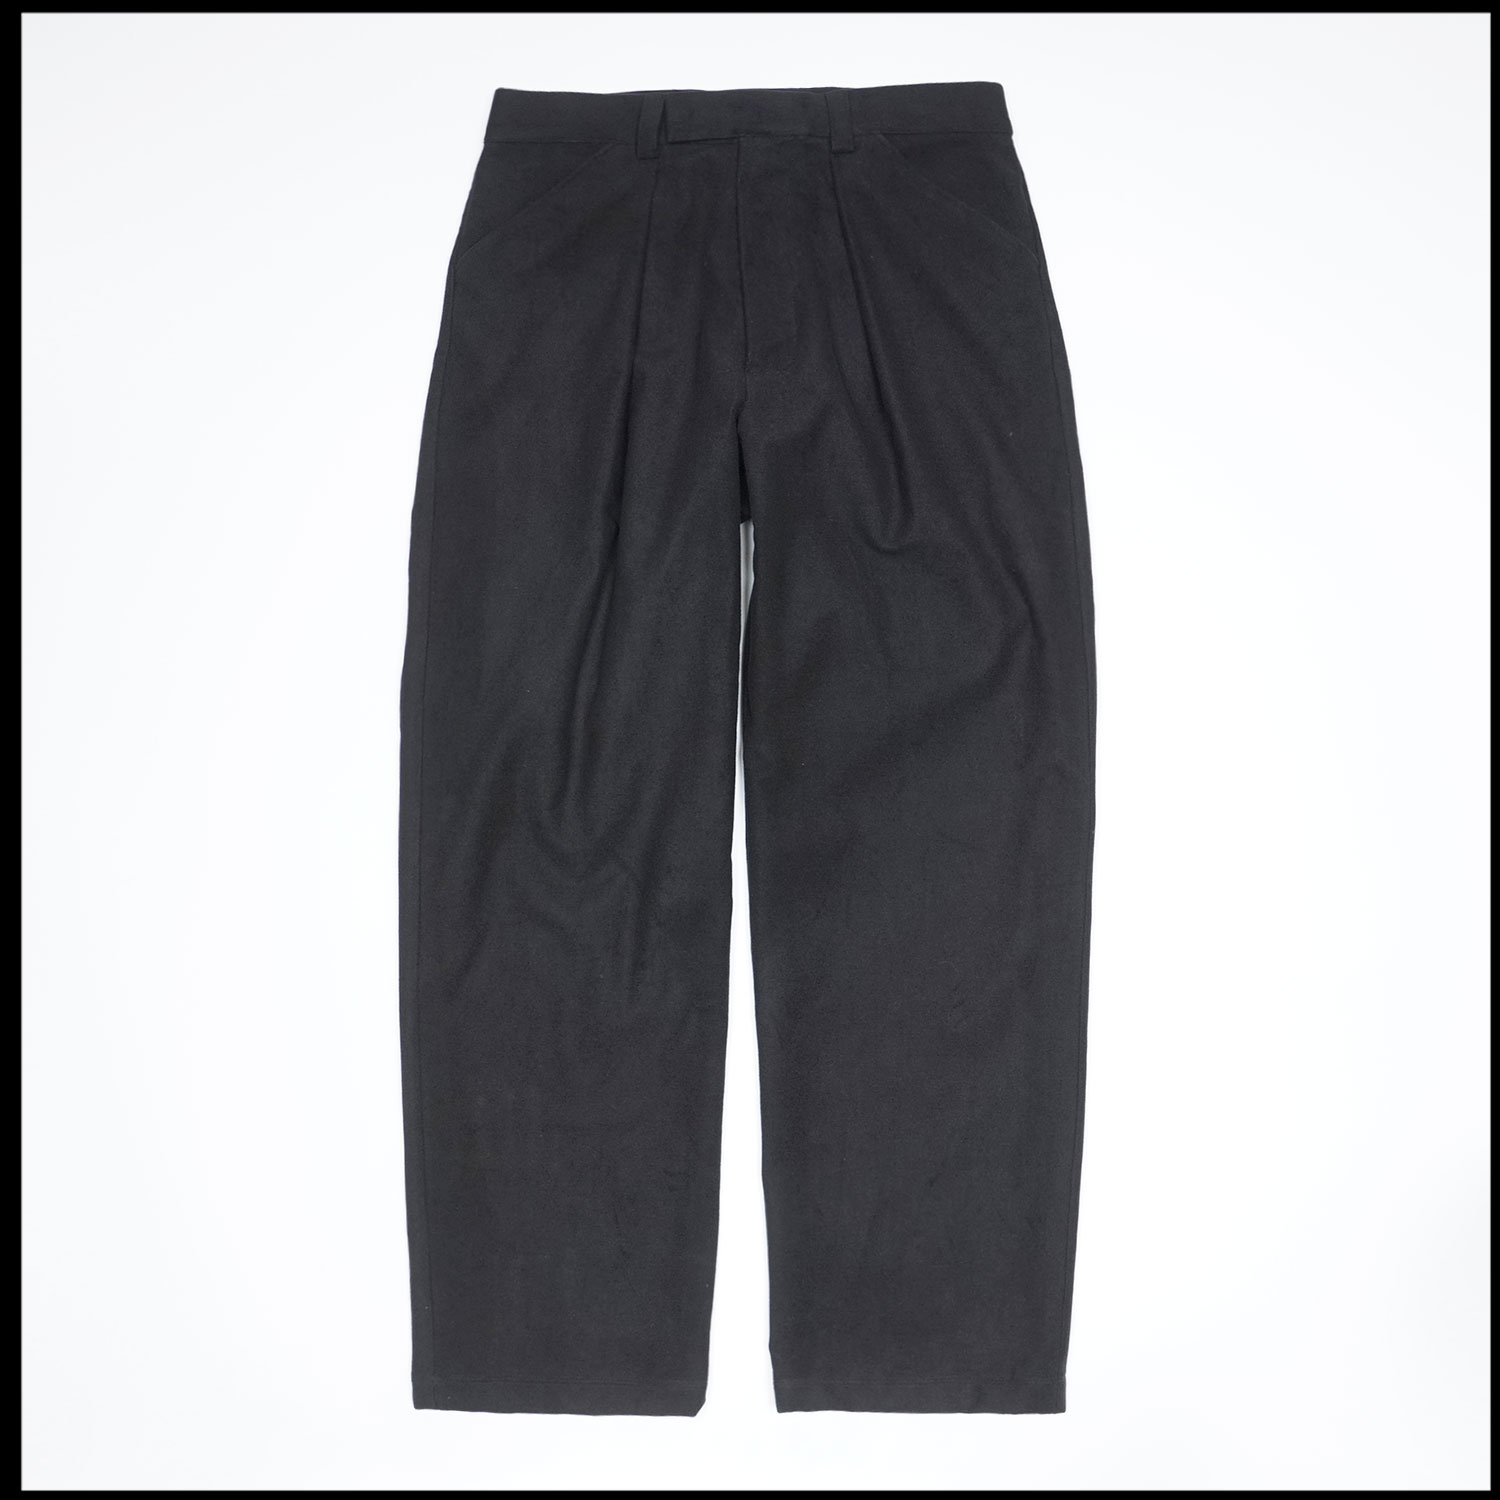 CHINO Pants in Black color by Arpenteur